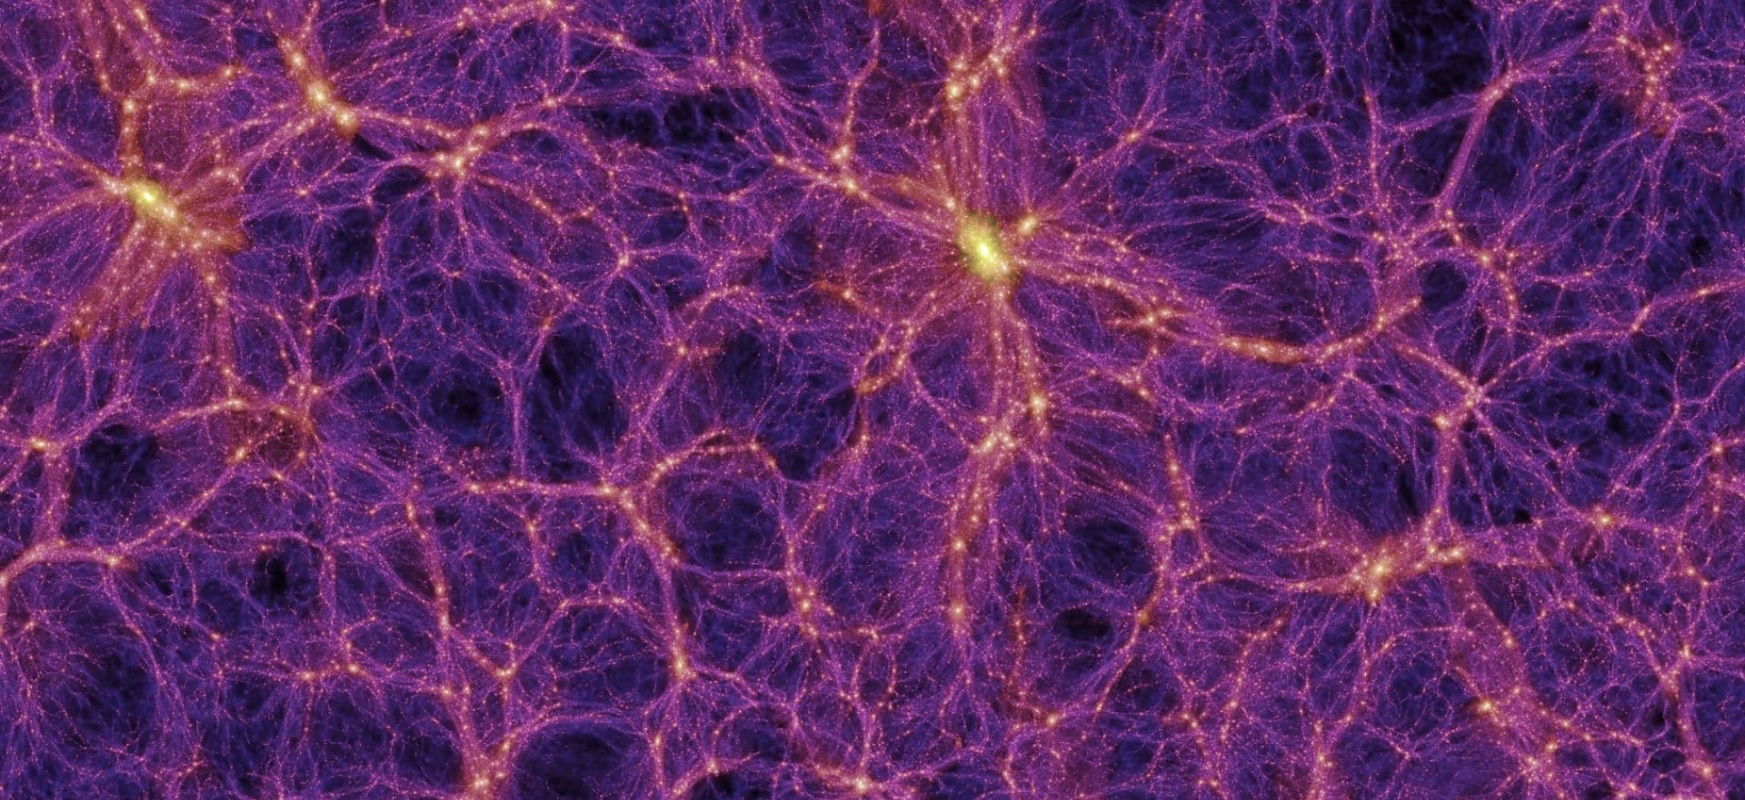 The universe is not expanding as it should.  Where do we go wrong in our calculations?